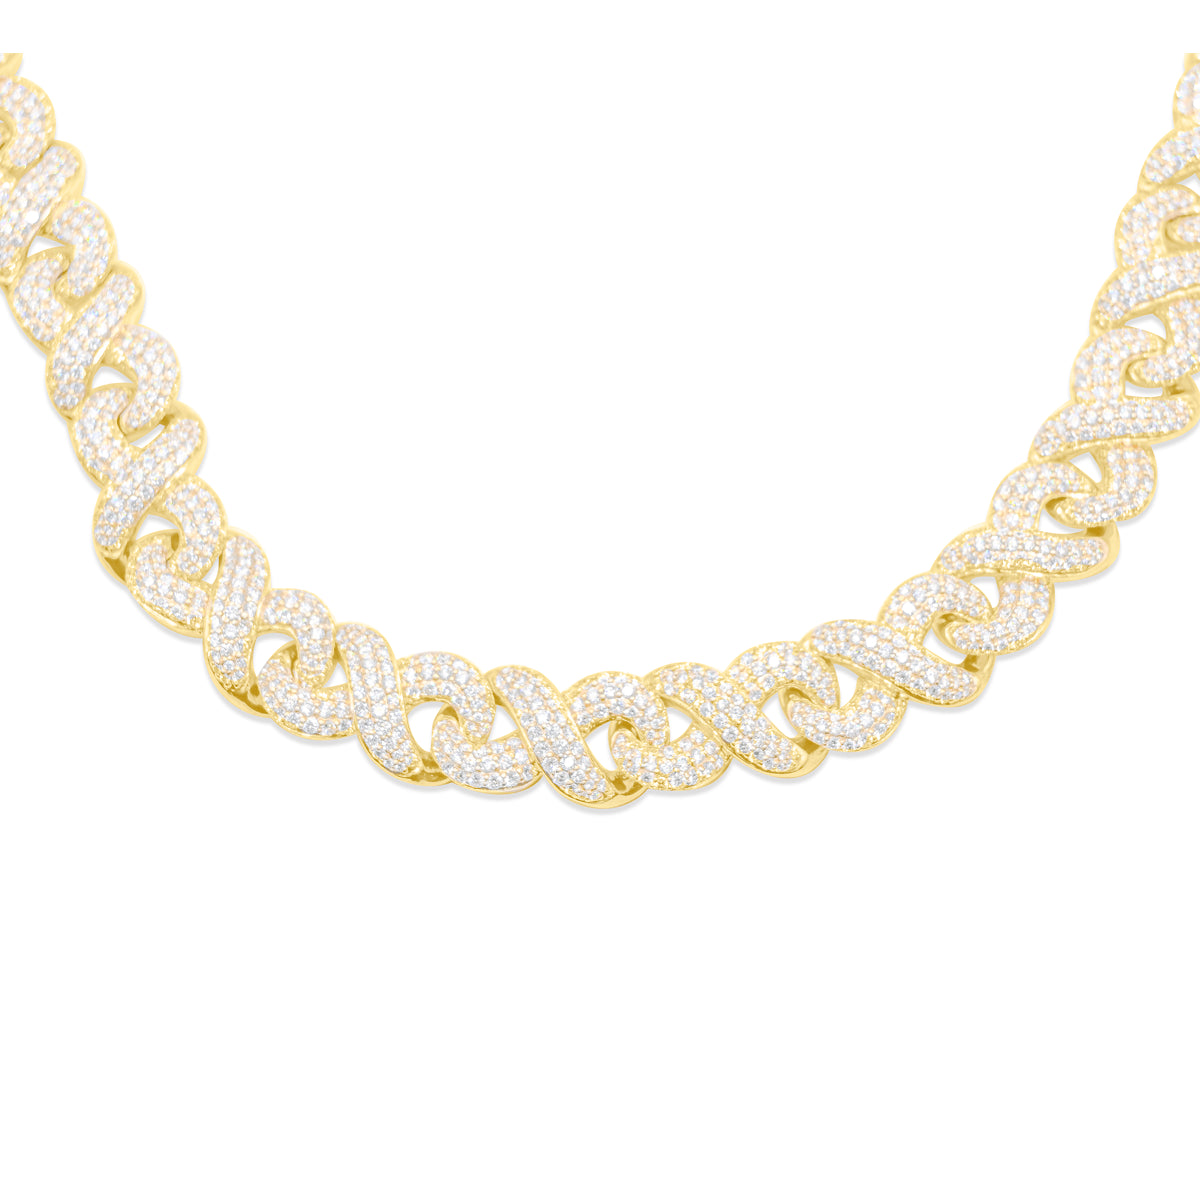 13.5mm 10K Gold Diamond Iced Out Infinity Link Chain